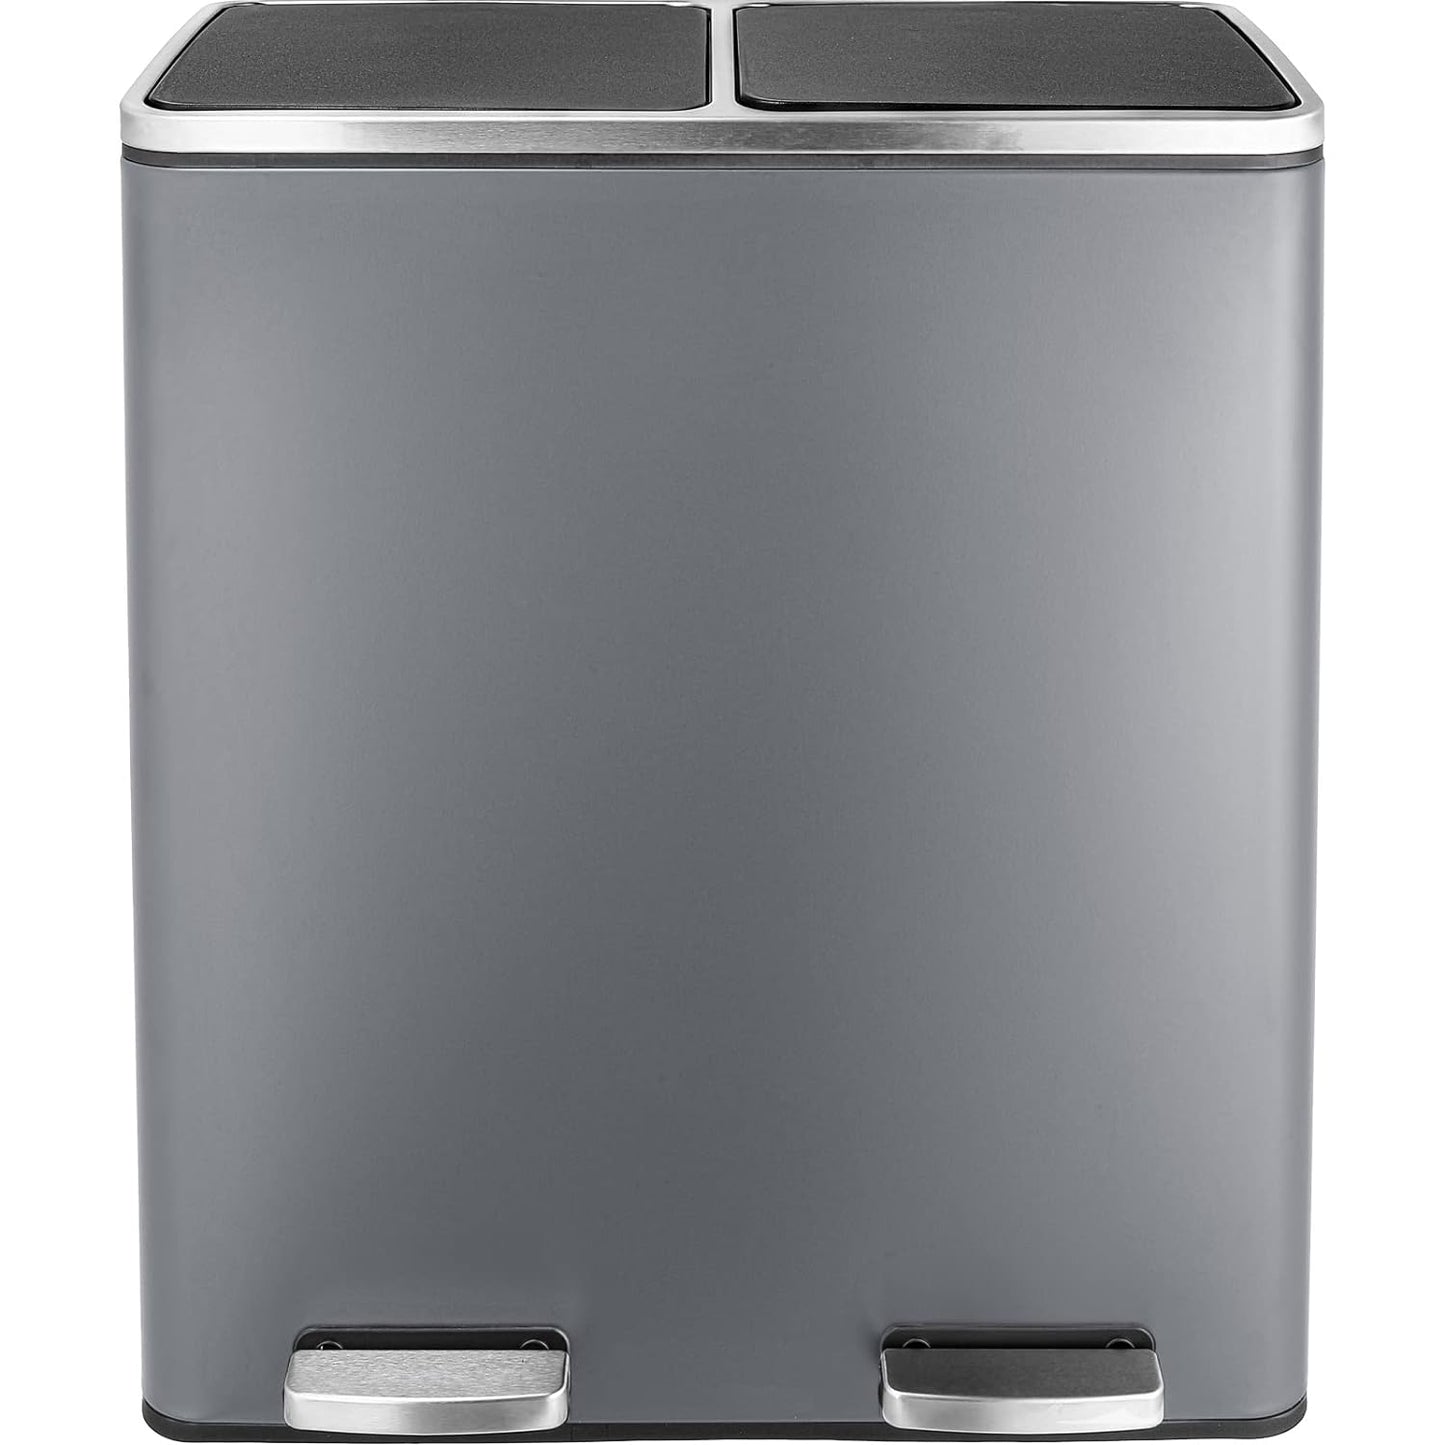 Arlopu 60 Liter / 16 Gal Dual Trash Can, Stainless Steel Kitchen Garbage Can, Double Compartment Classified Rubbish Bin, Recycle Dustbin with Plastic Inner Buckets, Soft-Close Lid